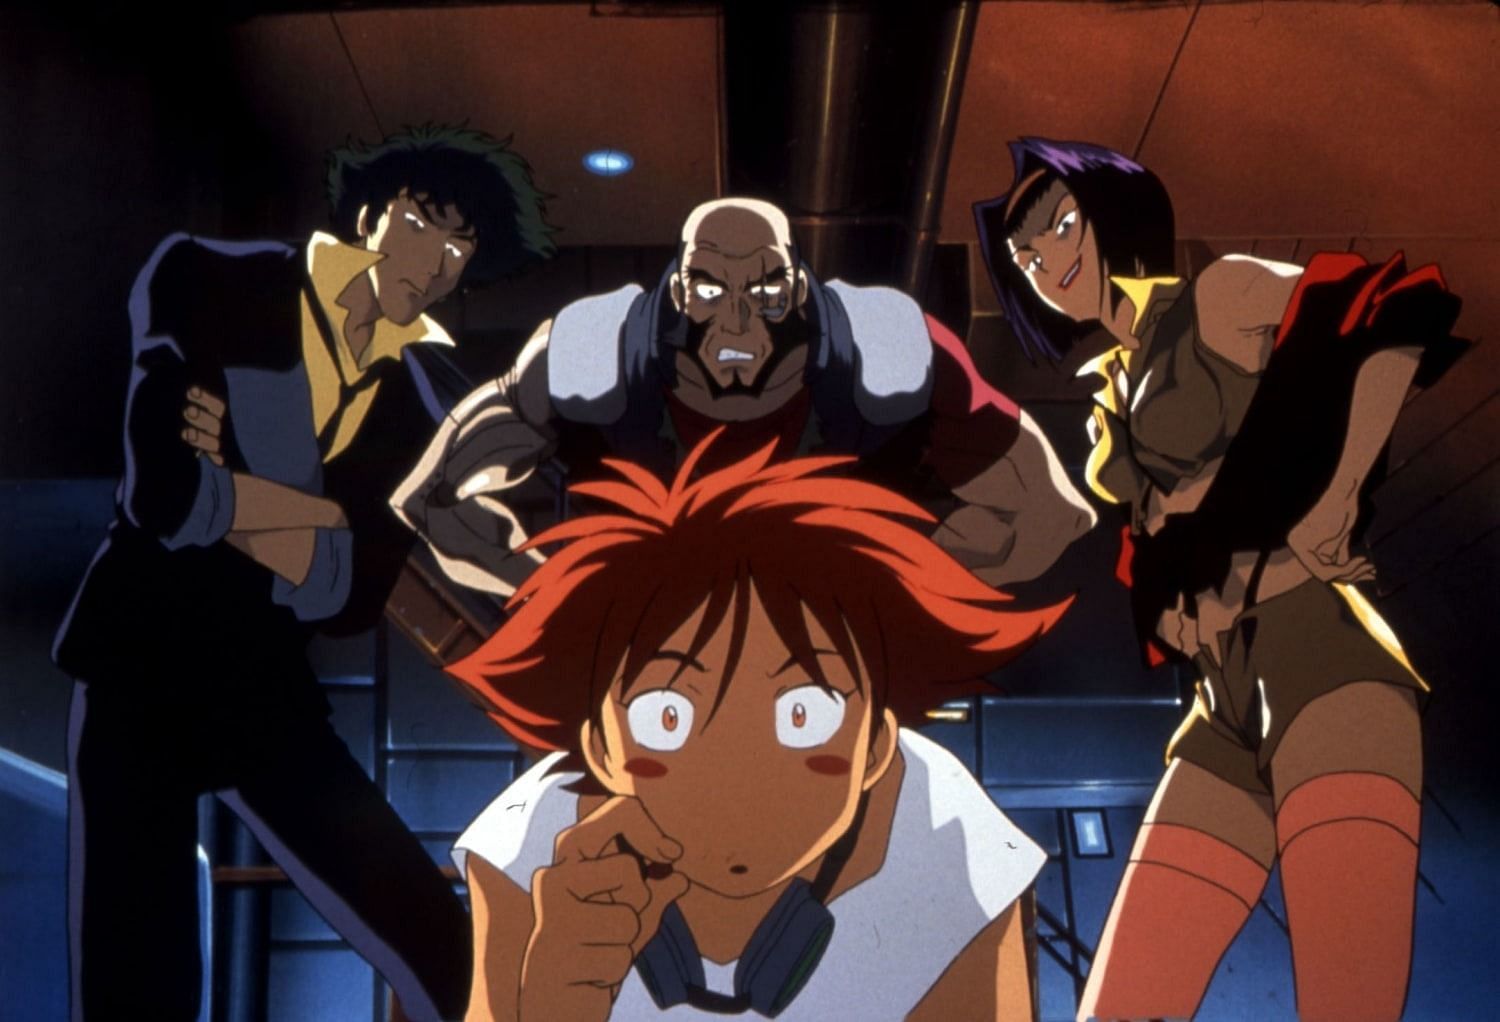 Spike, Jet, Faye, and Edward as seen in the anime (Image via Sunrise)